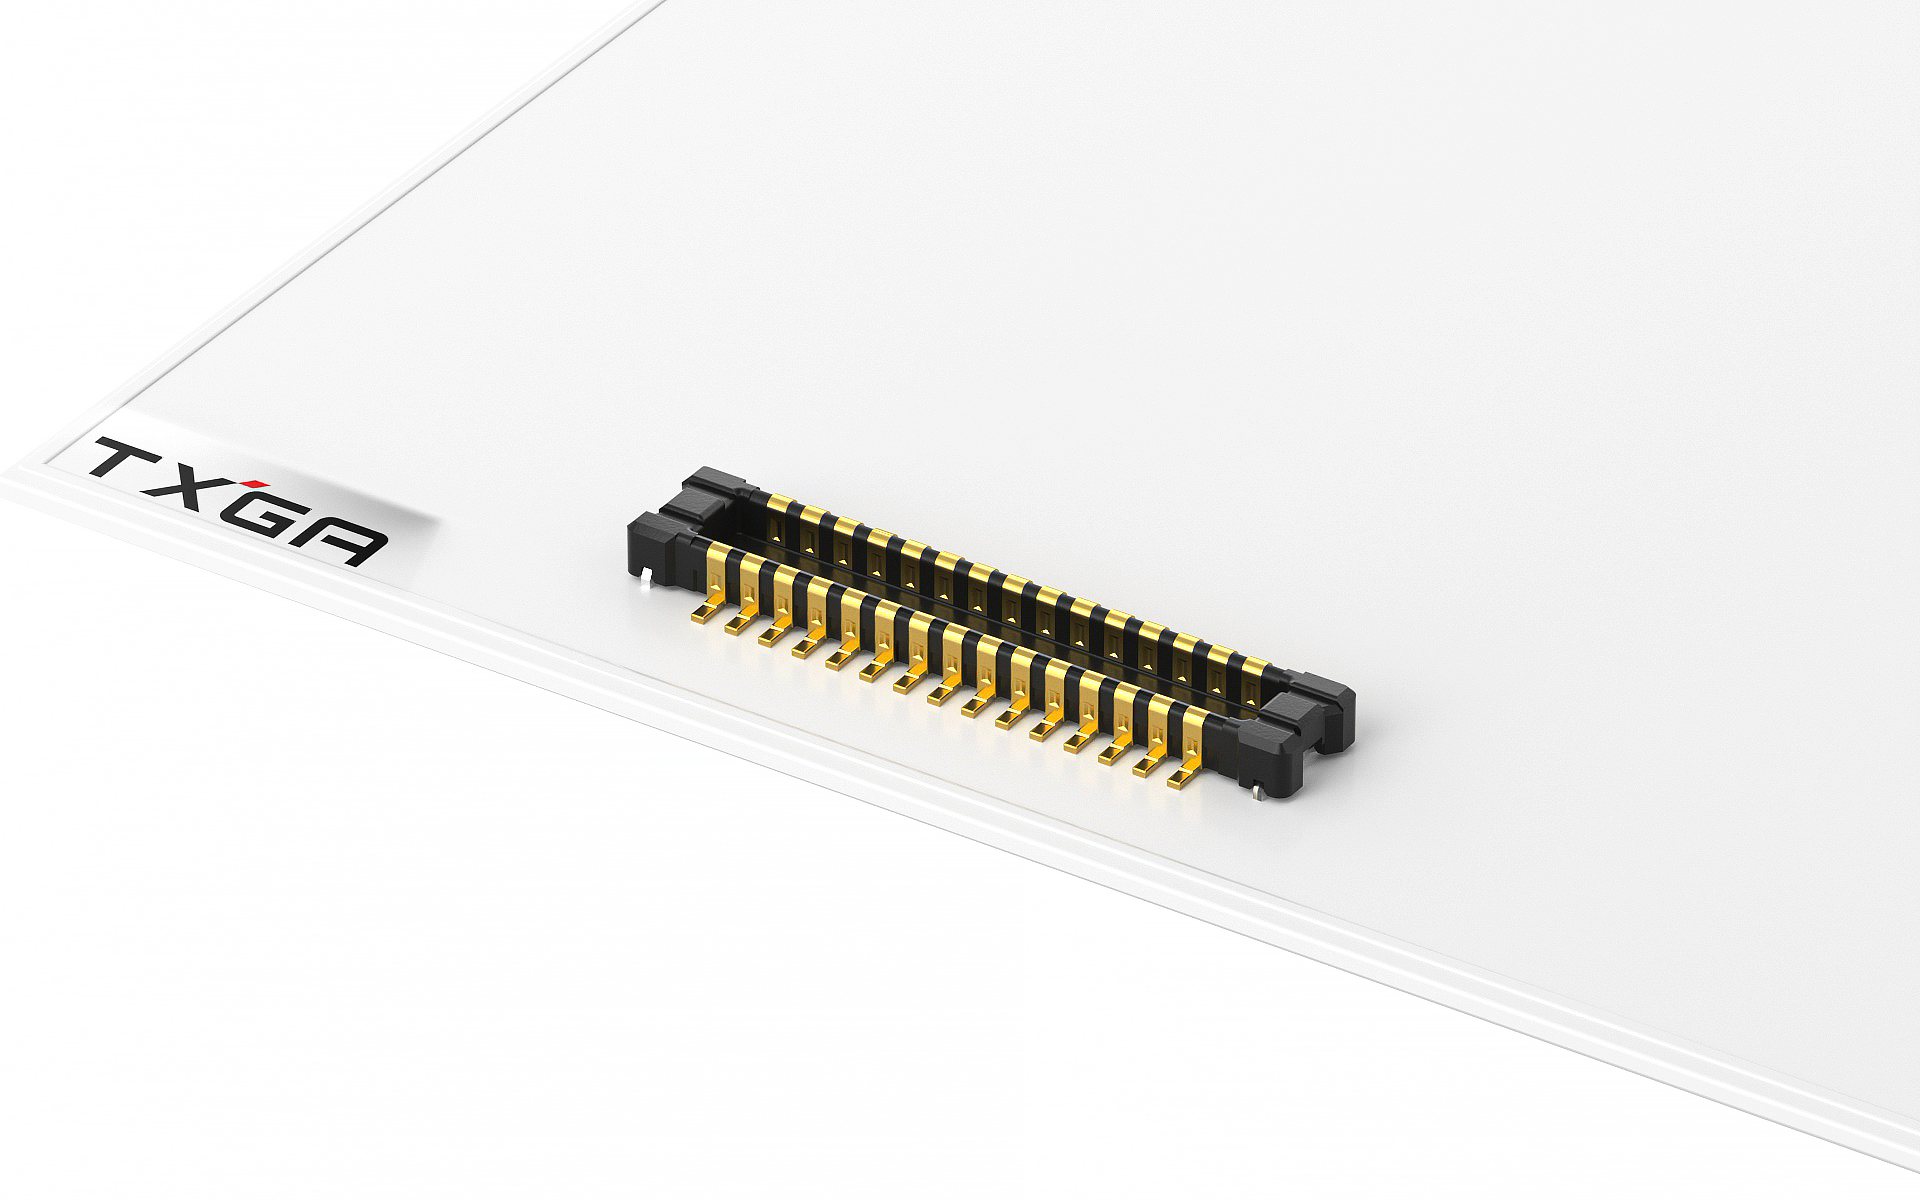 Board to Board Connector,0.4mm,Male,40Circuits,Vertical(180°),SMT (Mated height 0.8mm)